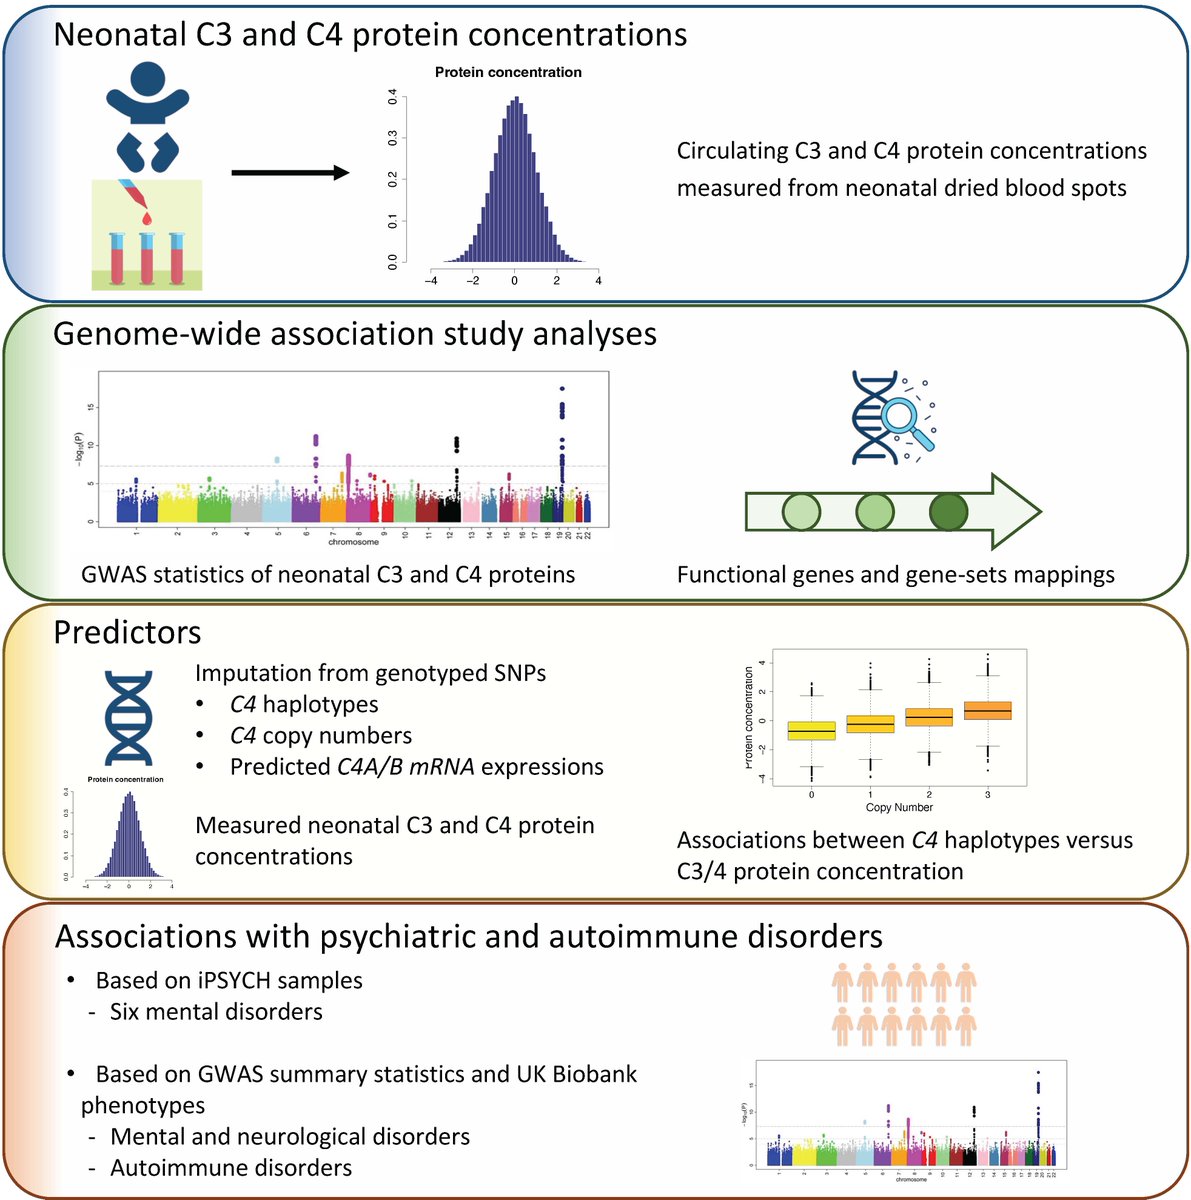 The correlates of neonatal complement component 3 and 4 protein concentrations with a focus on psychiatric and autoimmune disorders @CellGenomics Funded by @GrundforskFond Niels Bohr Professorship cell.com/cell-genomics/…